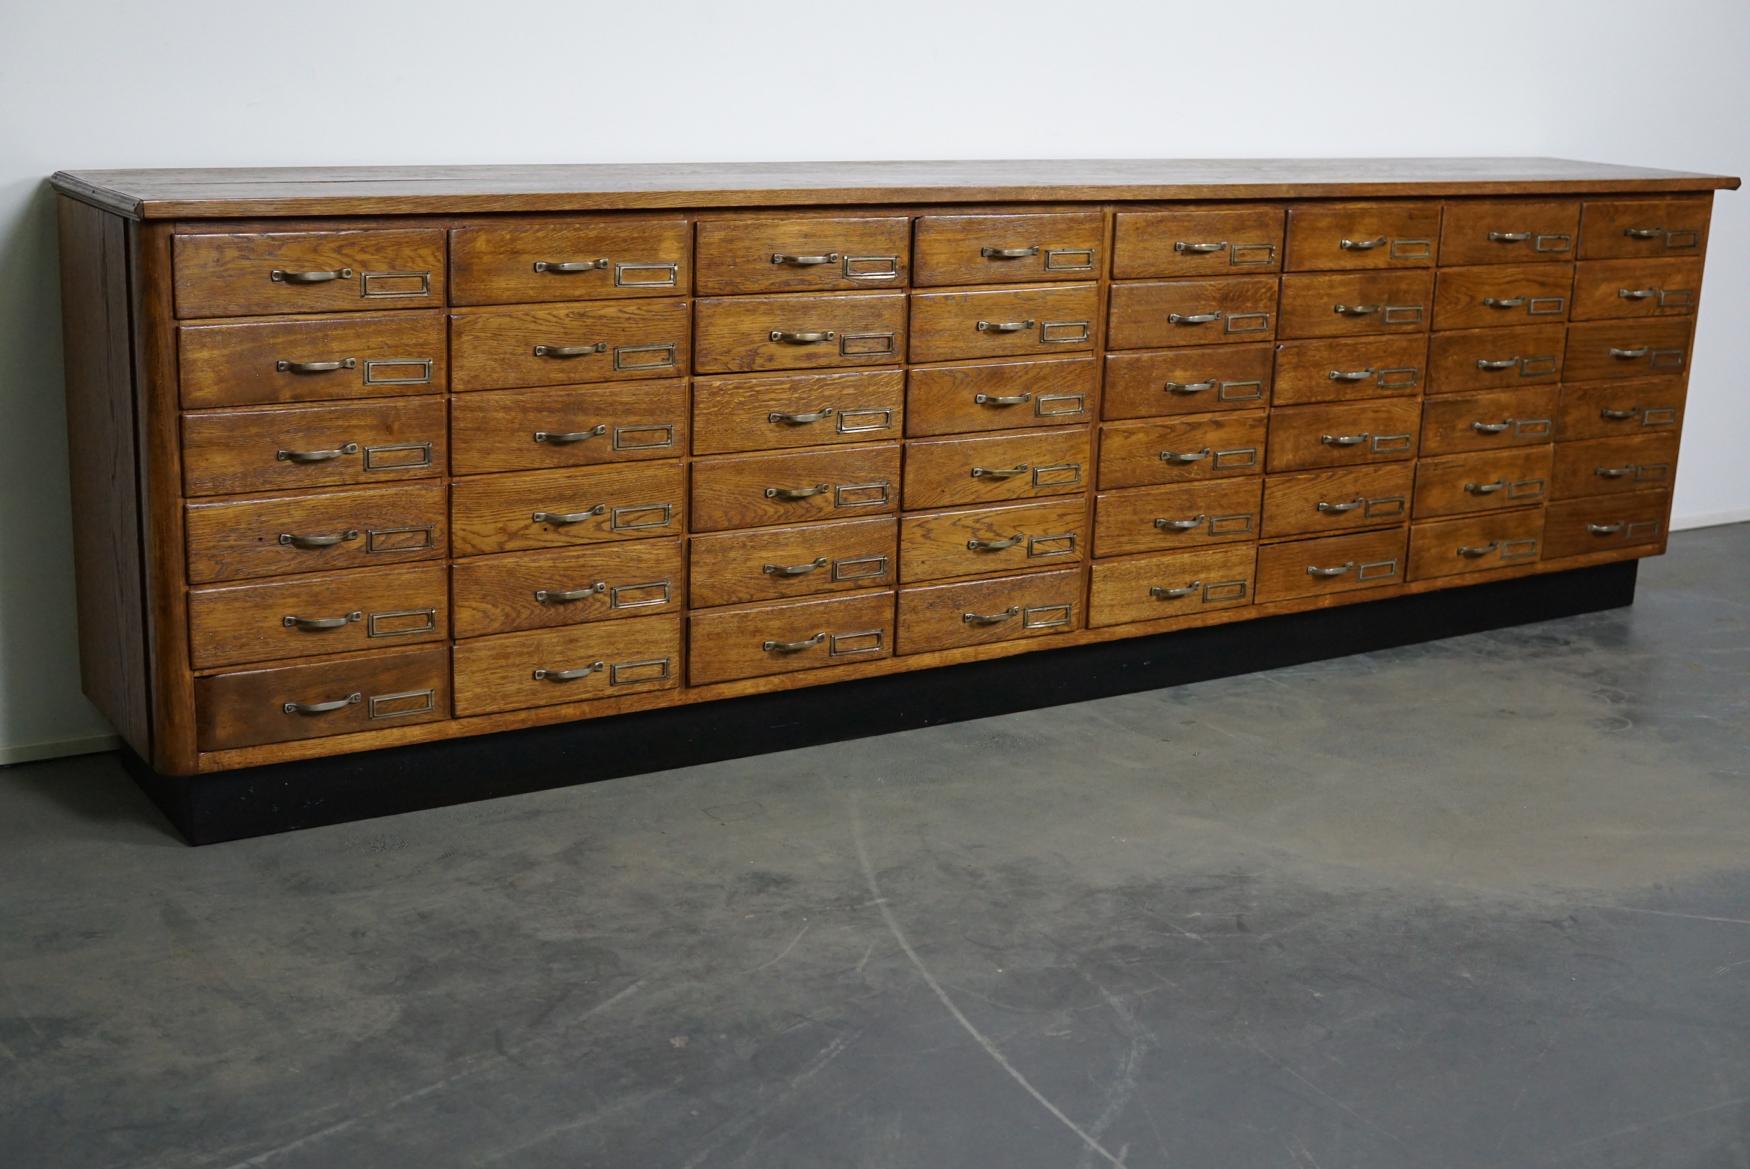 This large oak apothecary cabinet was made circa 1940s in the Netherlands. It features 48 drawers with metal handles and name card holders. It was originally used in a shop for lightning supplies in the city of 's-Hertogenbosch. Some of the drawers